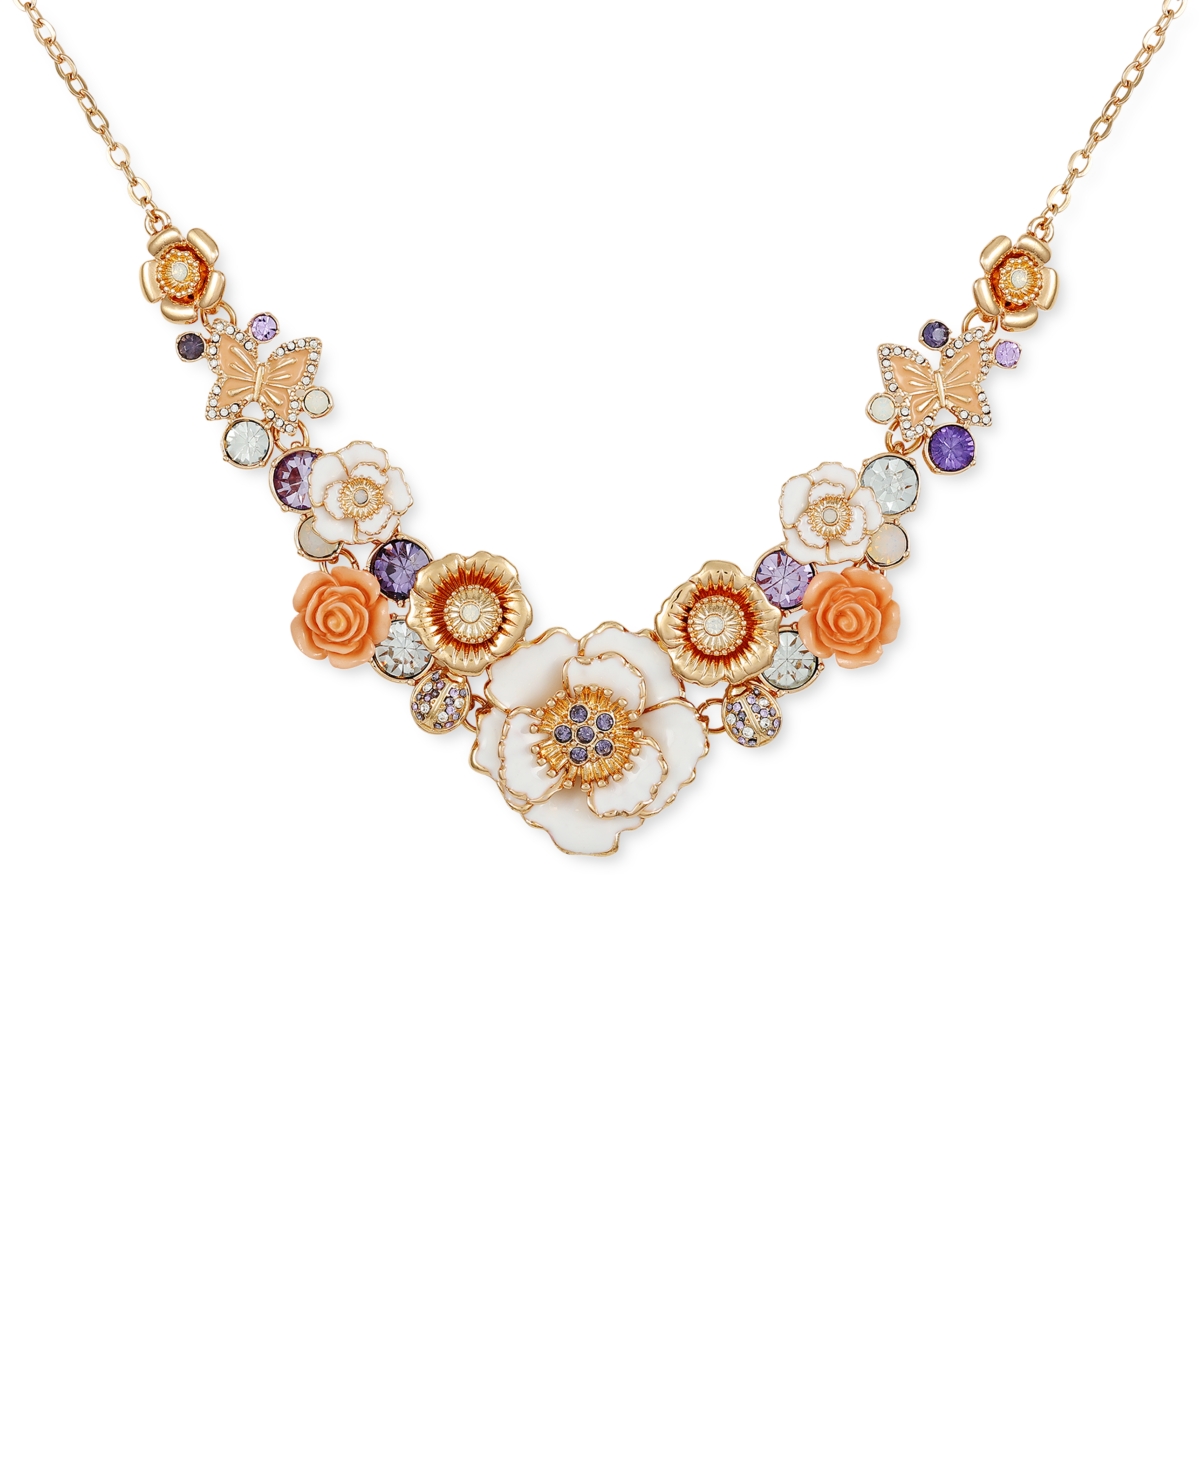 Guess Gold-tone Mixed Color Stone Flower Statement Necklace, 16" + 2" Extender